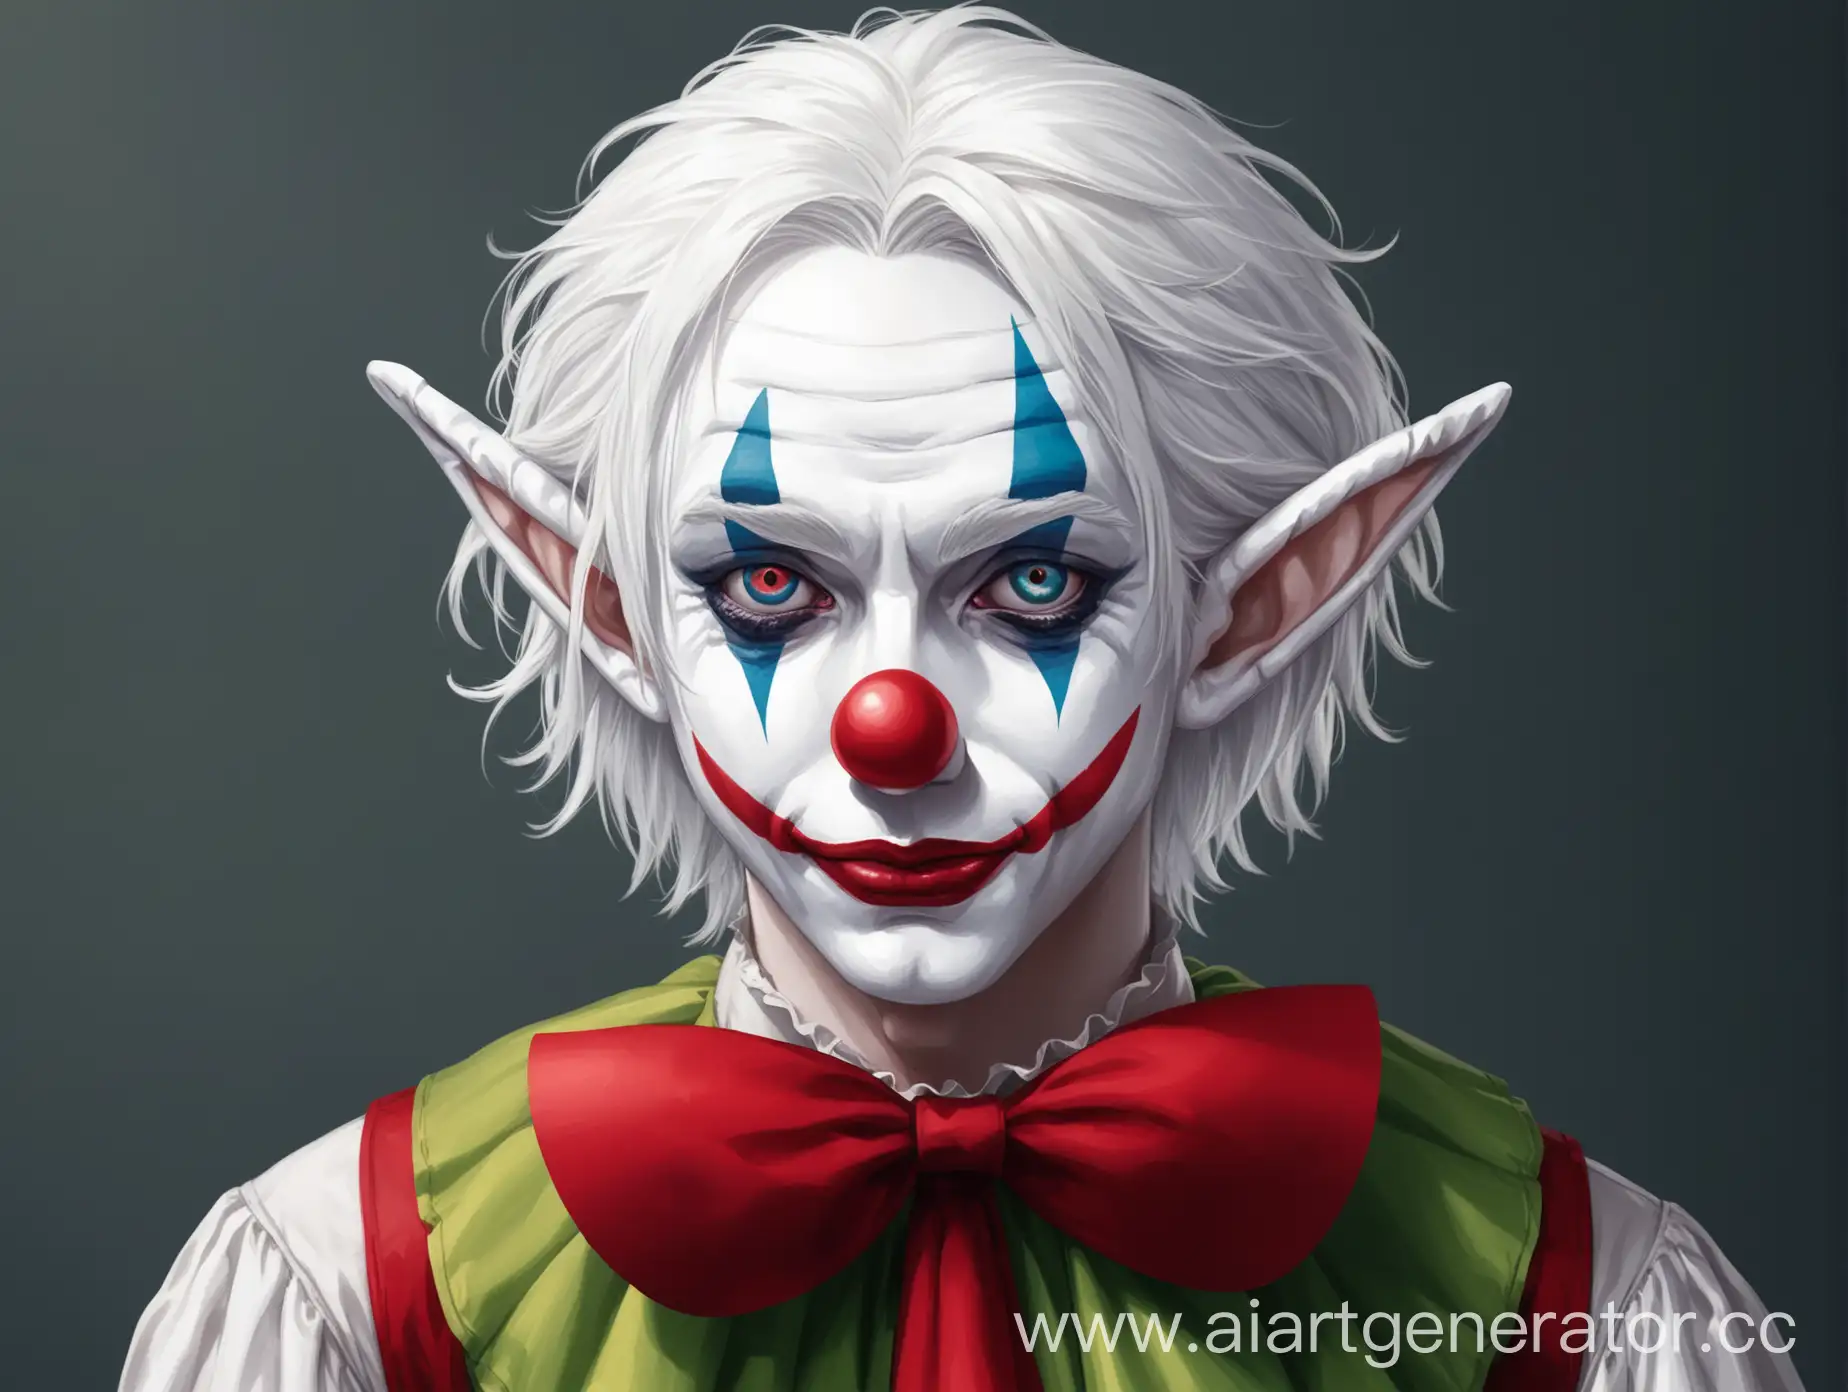 Eccentric-Clown-with-Elven-Features-in-White-Costume